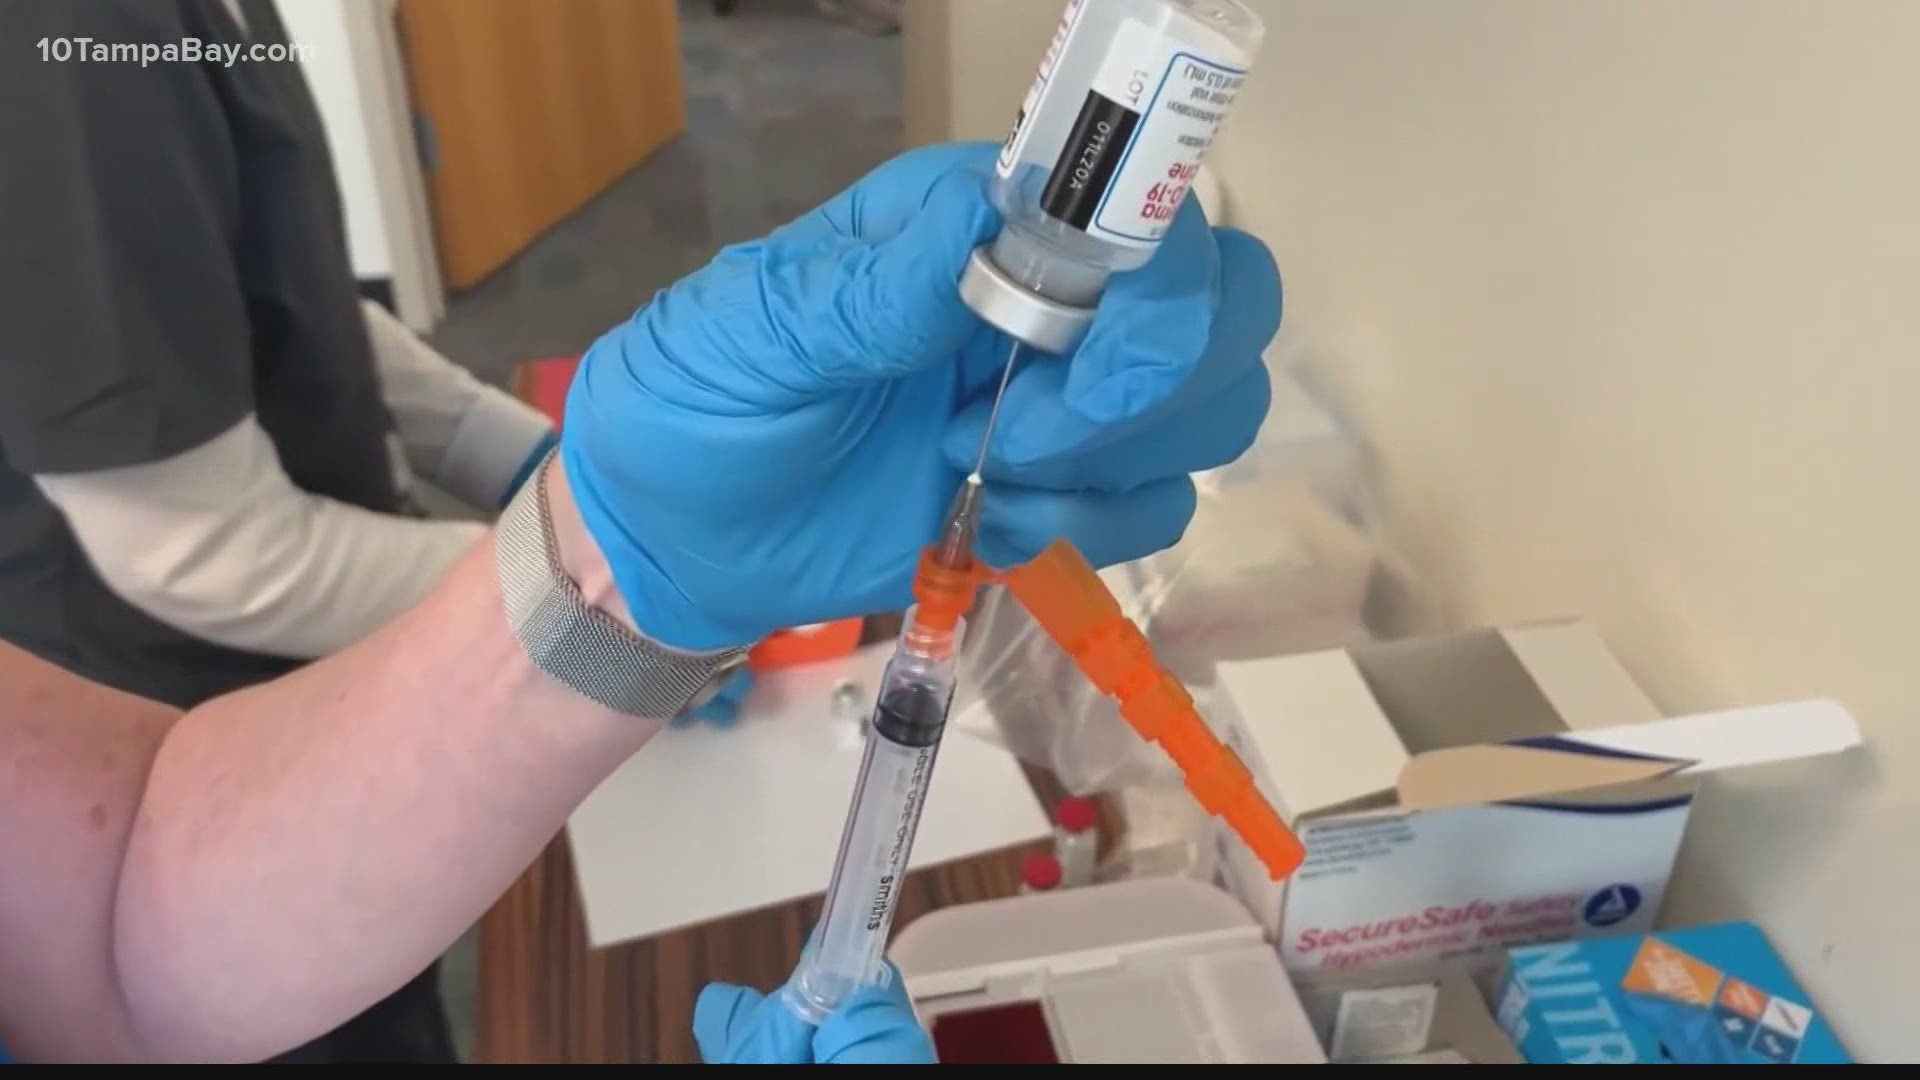 Roughly 3,300 new coronavirus vaccine doses are heading to Sarasota County just as the area is adopting a new system to distribute doses.